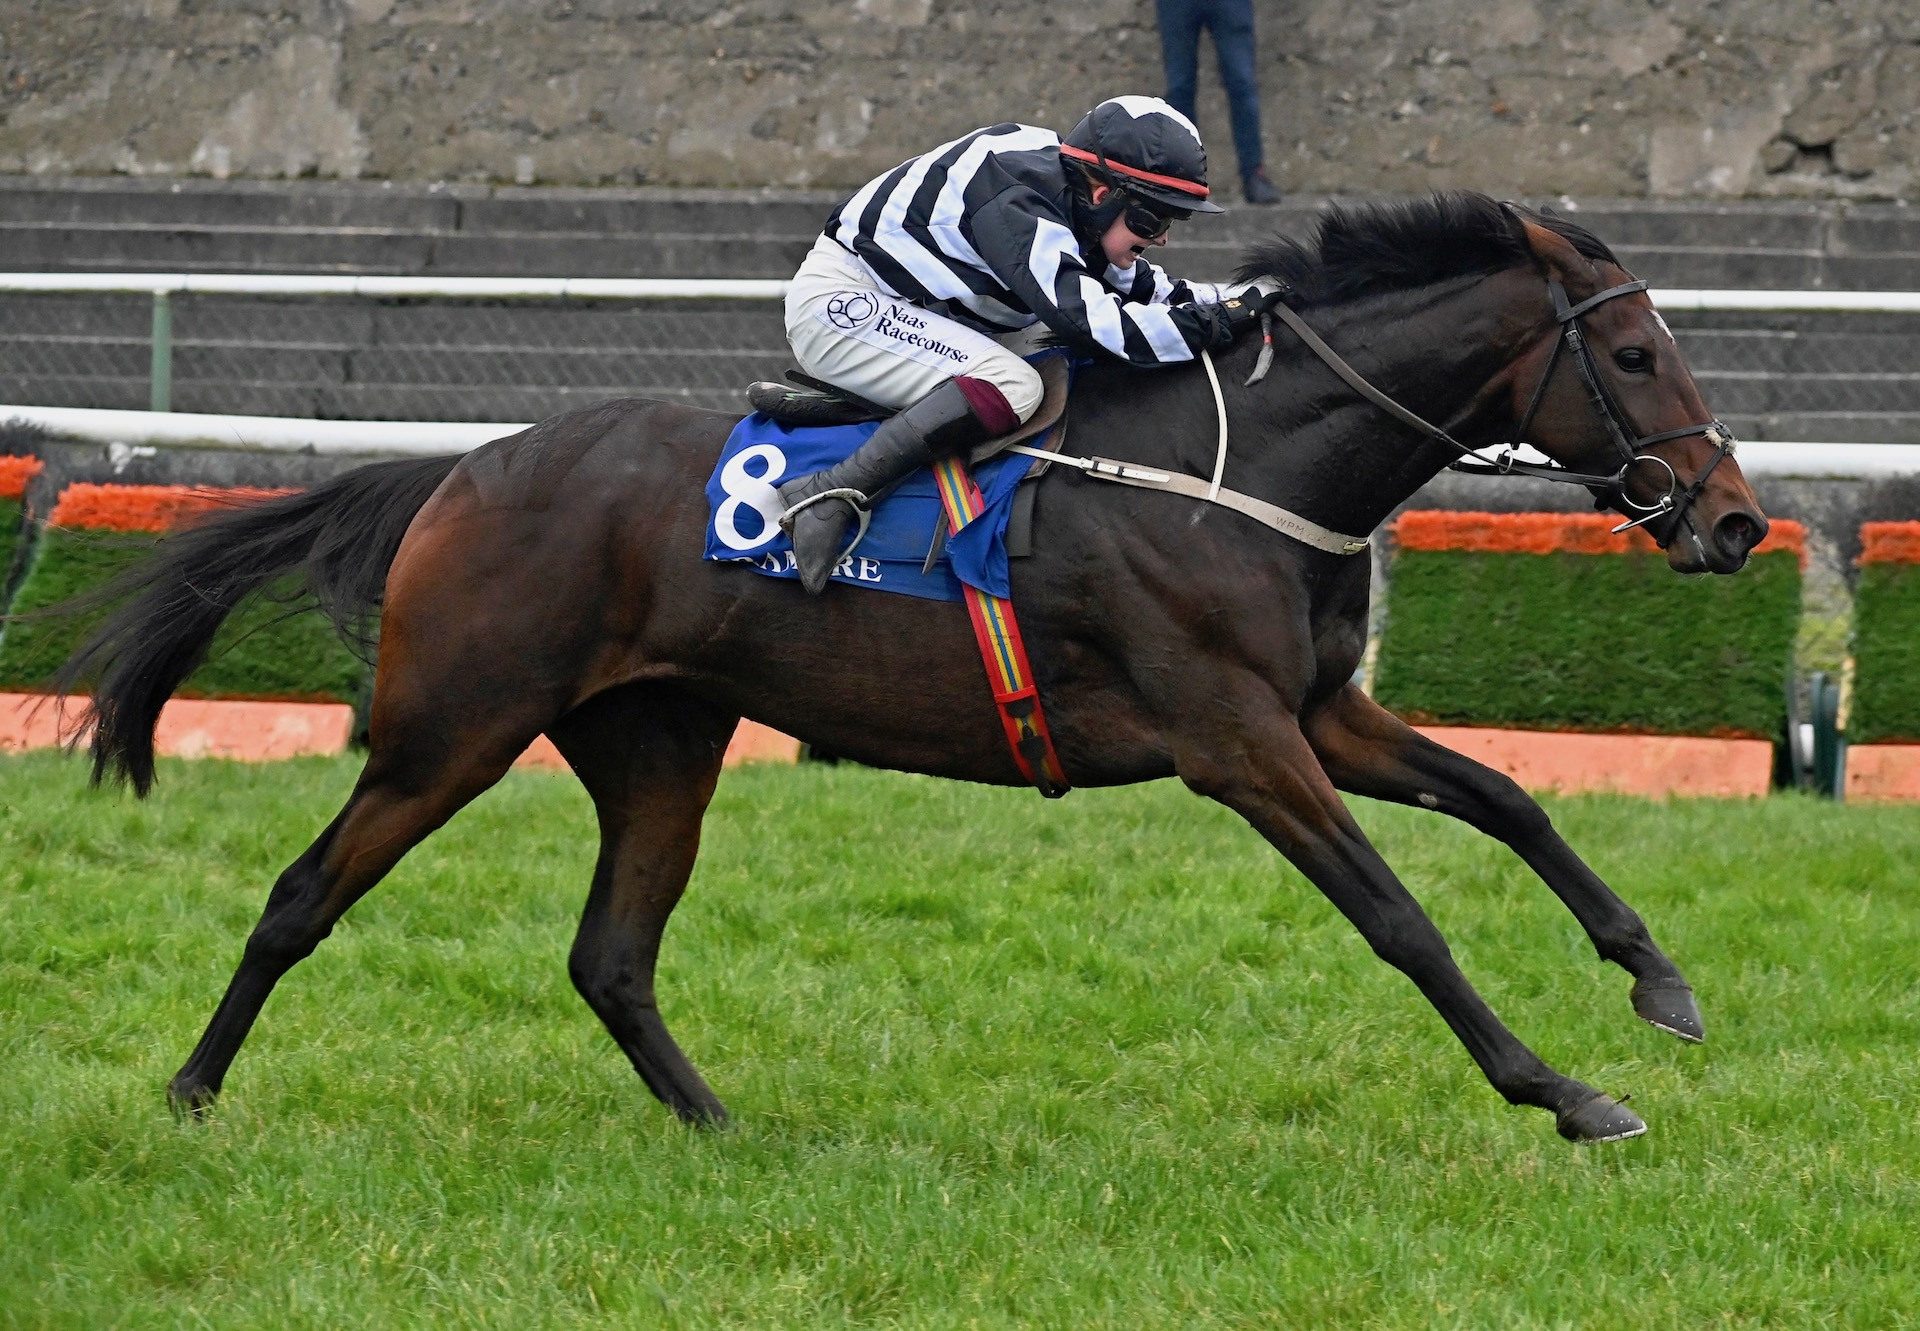 Where's Nanny (Walk In The Park) Wins on debut at Tramore